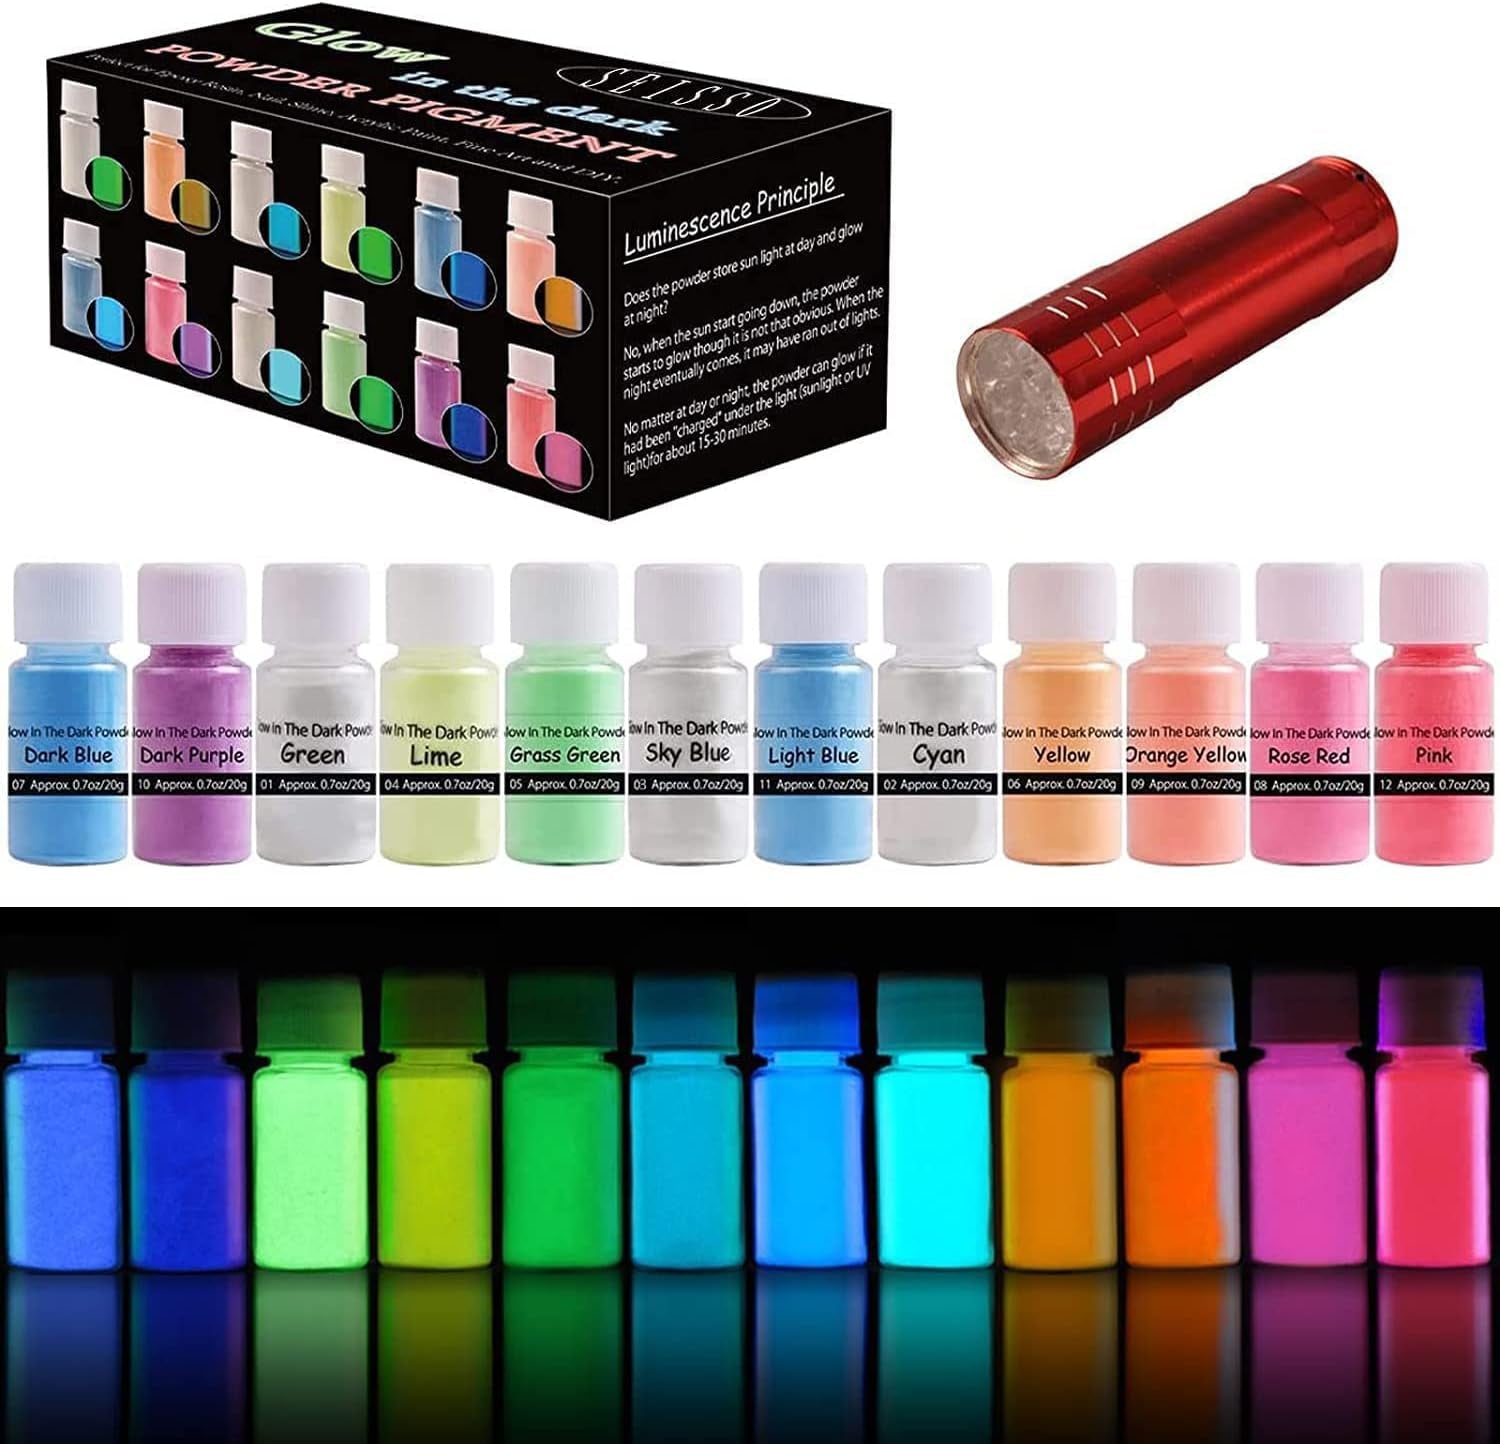 Glow in the Dark Pigment Powder, 12 Color 0.7Oz/20G Epoxy Resin Luminous Powder Set for Resin Art, Nail Art, Acrylic Paint and DIY Crafts, Safe and Long Lasting